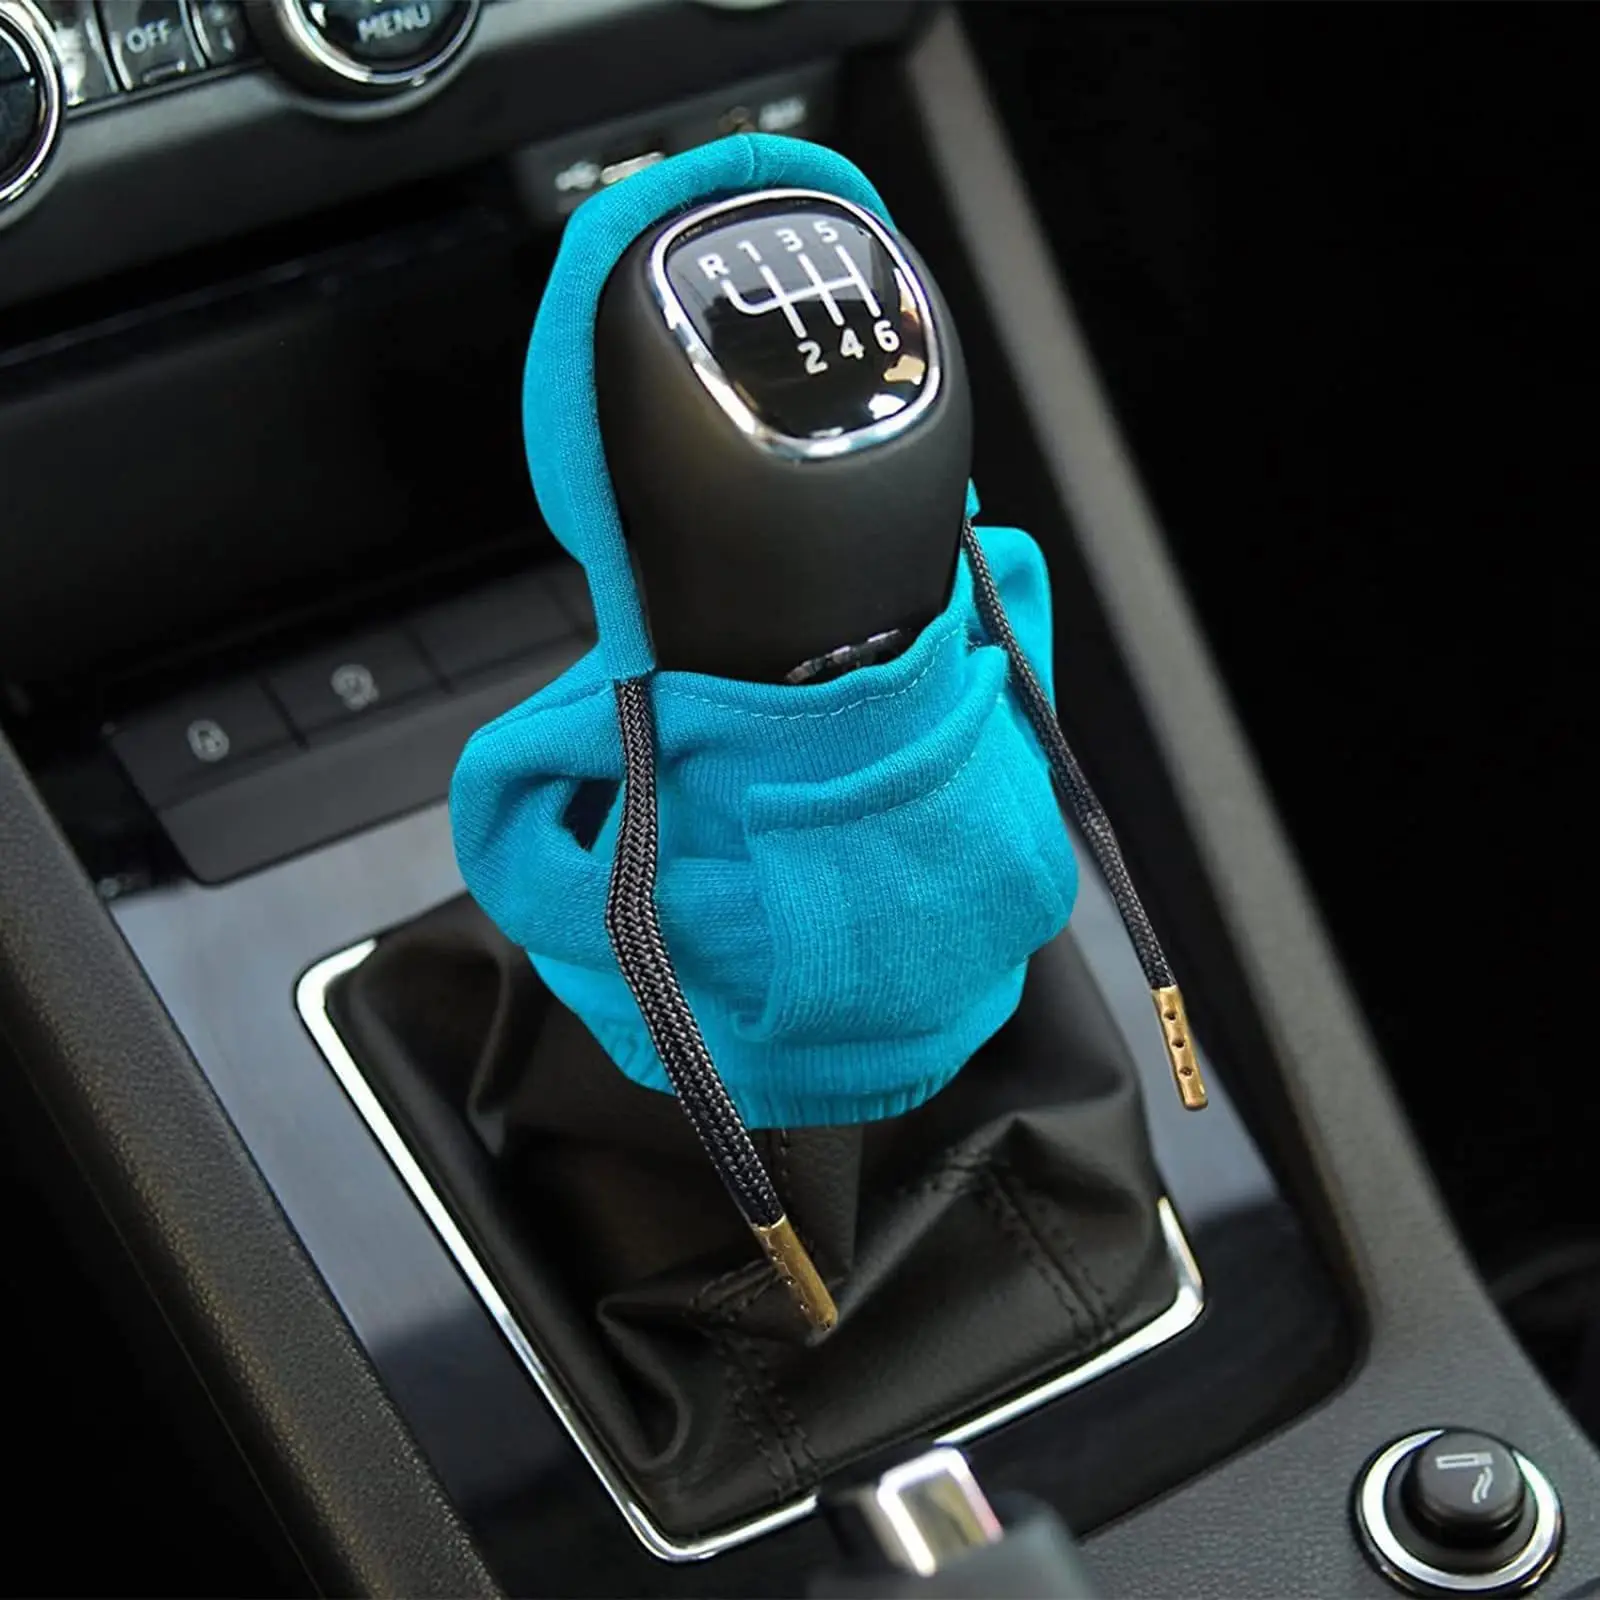 

2023 New Arrival Creativity Sweatshirt Nonslip Funny Modeling Universal Gear Shift Knob Cover car gear hoodie cover